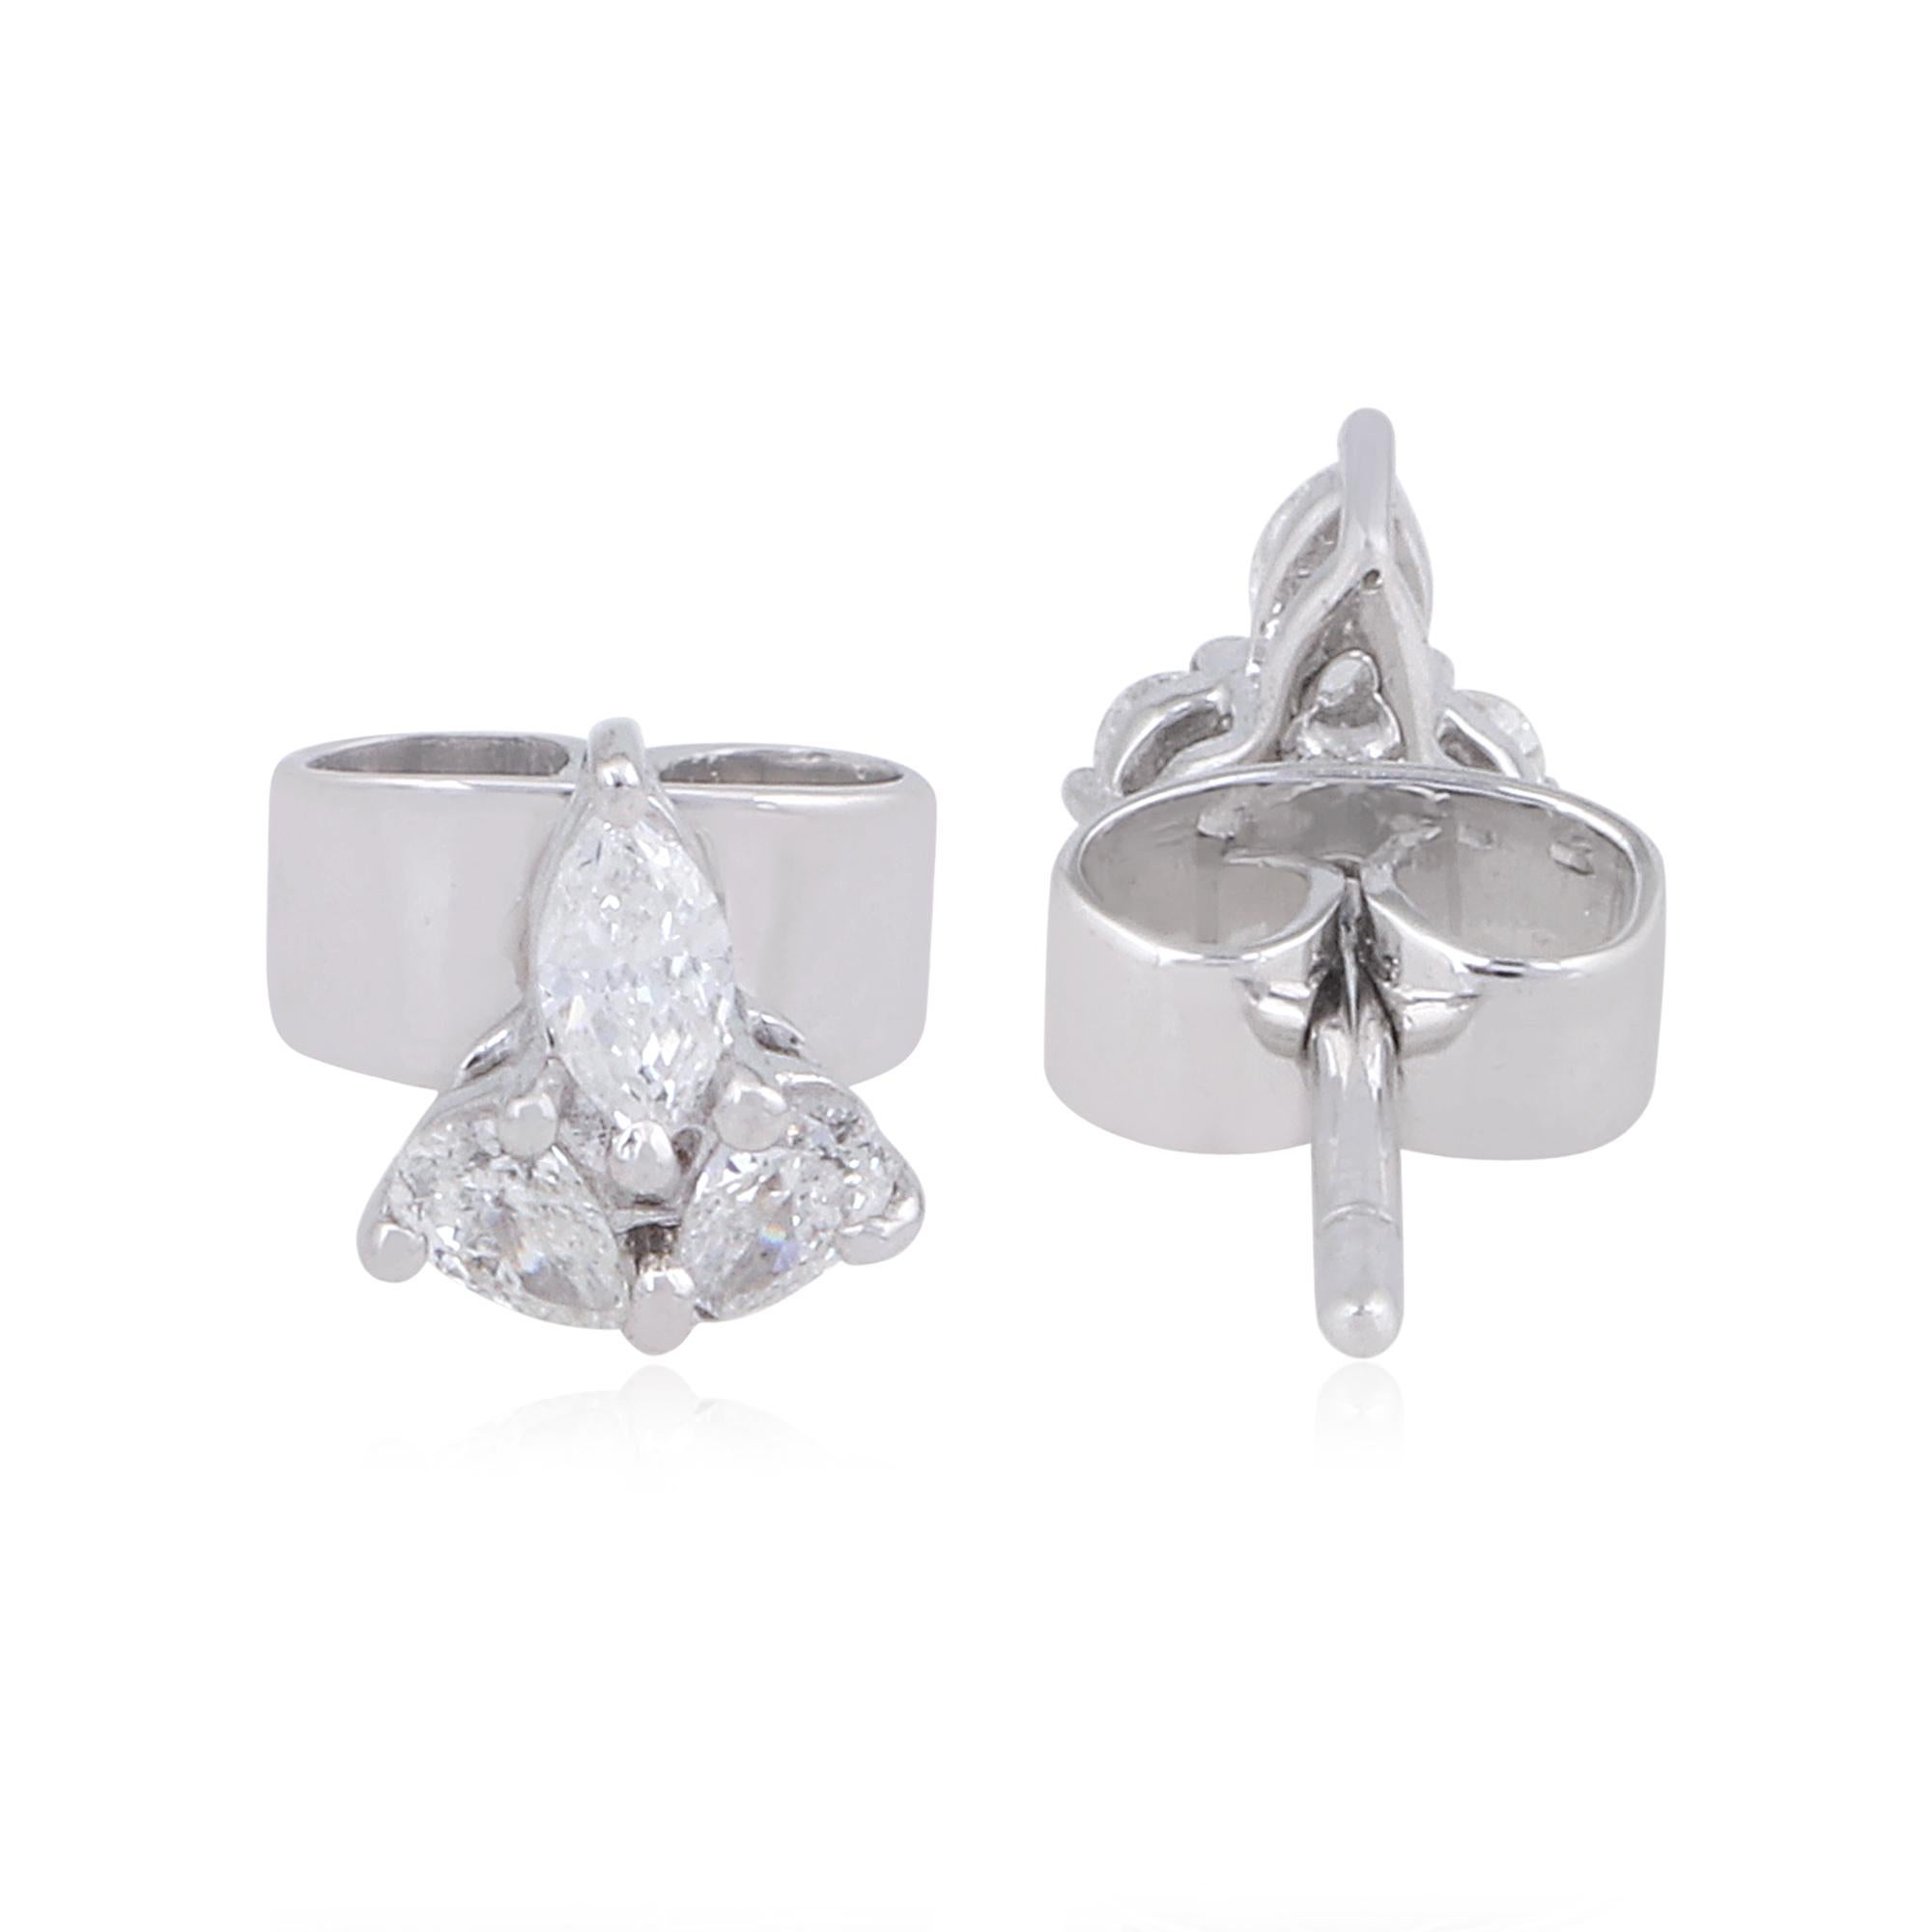 Item Code :- SEE-1036
Gross Wt. :- 1.24 gm
18k White Gold Wt. :- 1.18 gm
Diamond Wt. :- 0.30 Ct. ( AVERAGE DIAMOND CLARITY SI1-SI2 & COLOR H-I )
Earrings Size :- 6 mm approx.

✦ Sizing
.....................
We can adjust most items to fit your